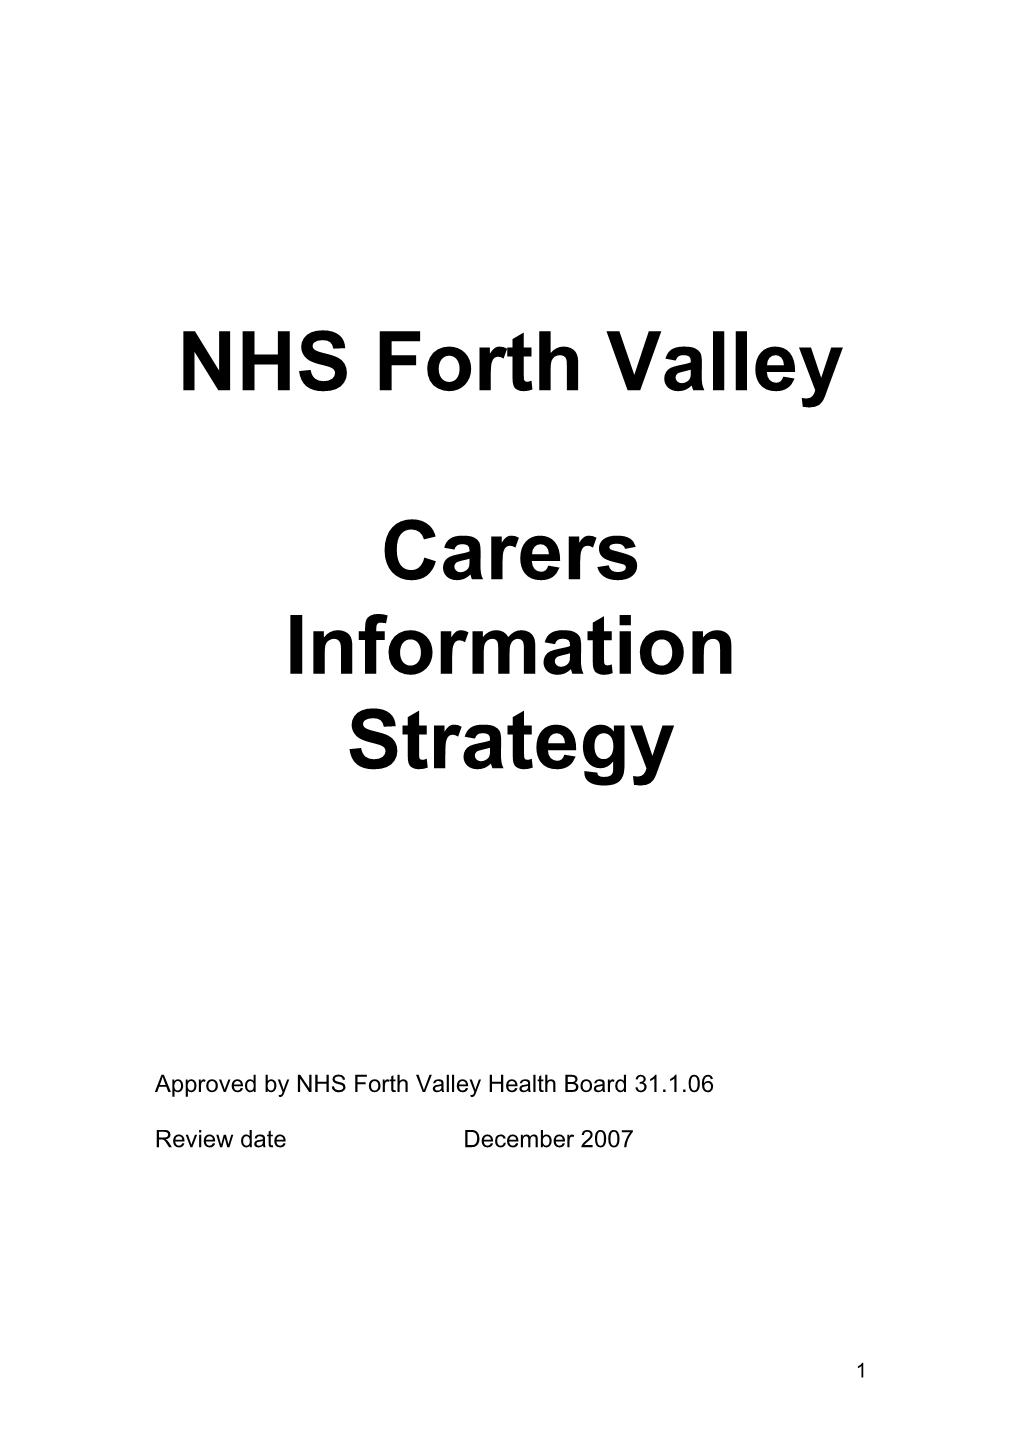 Carers Information Strategy